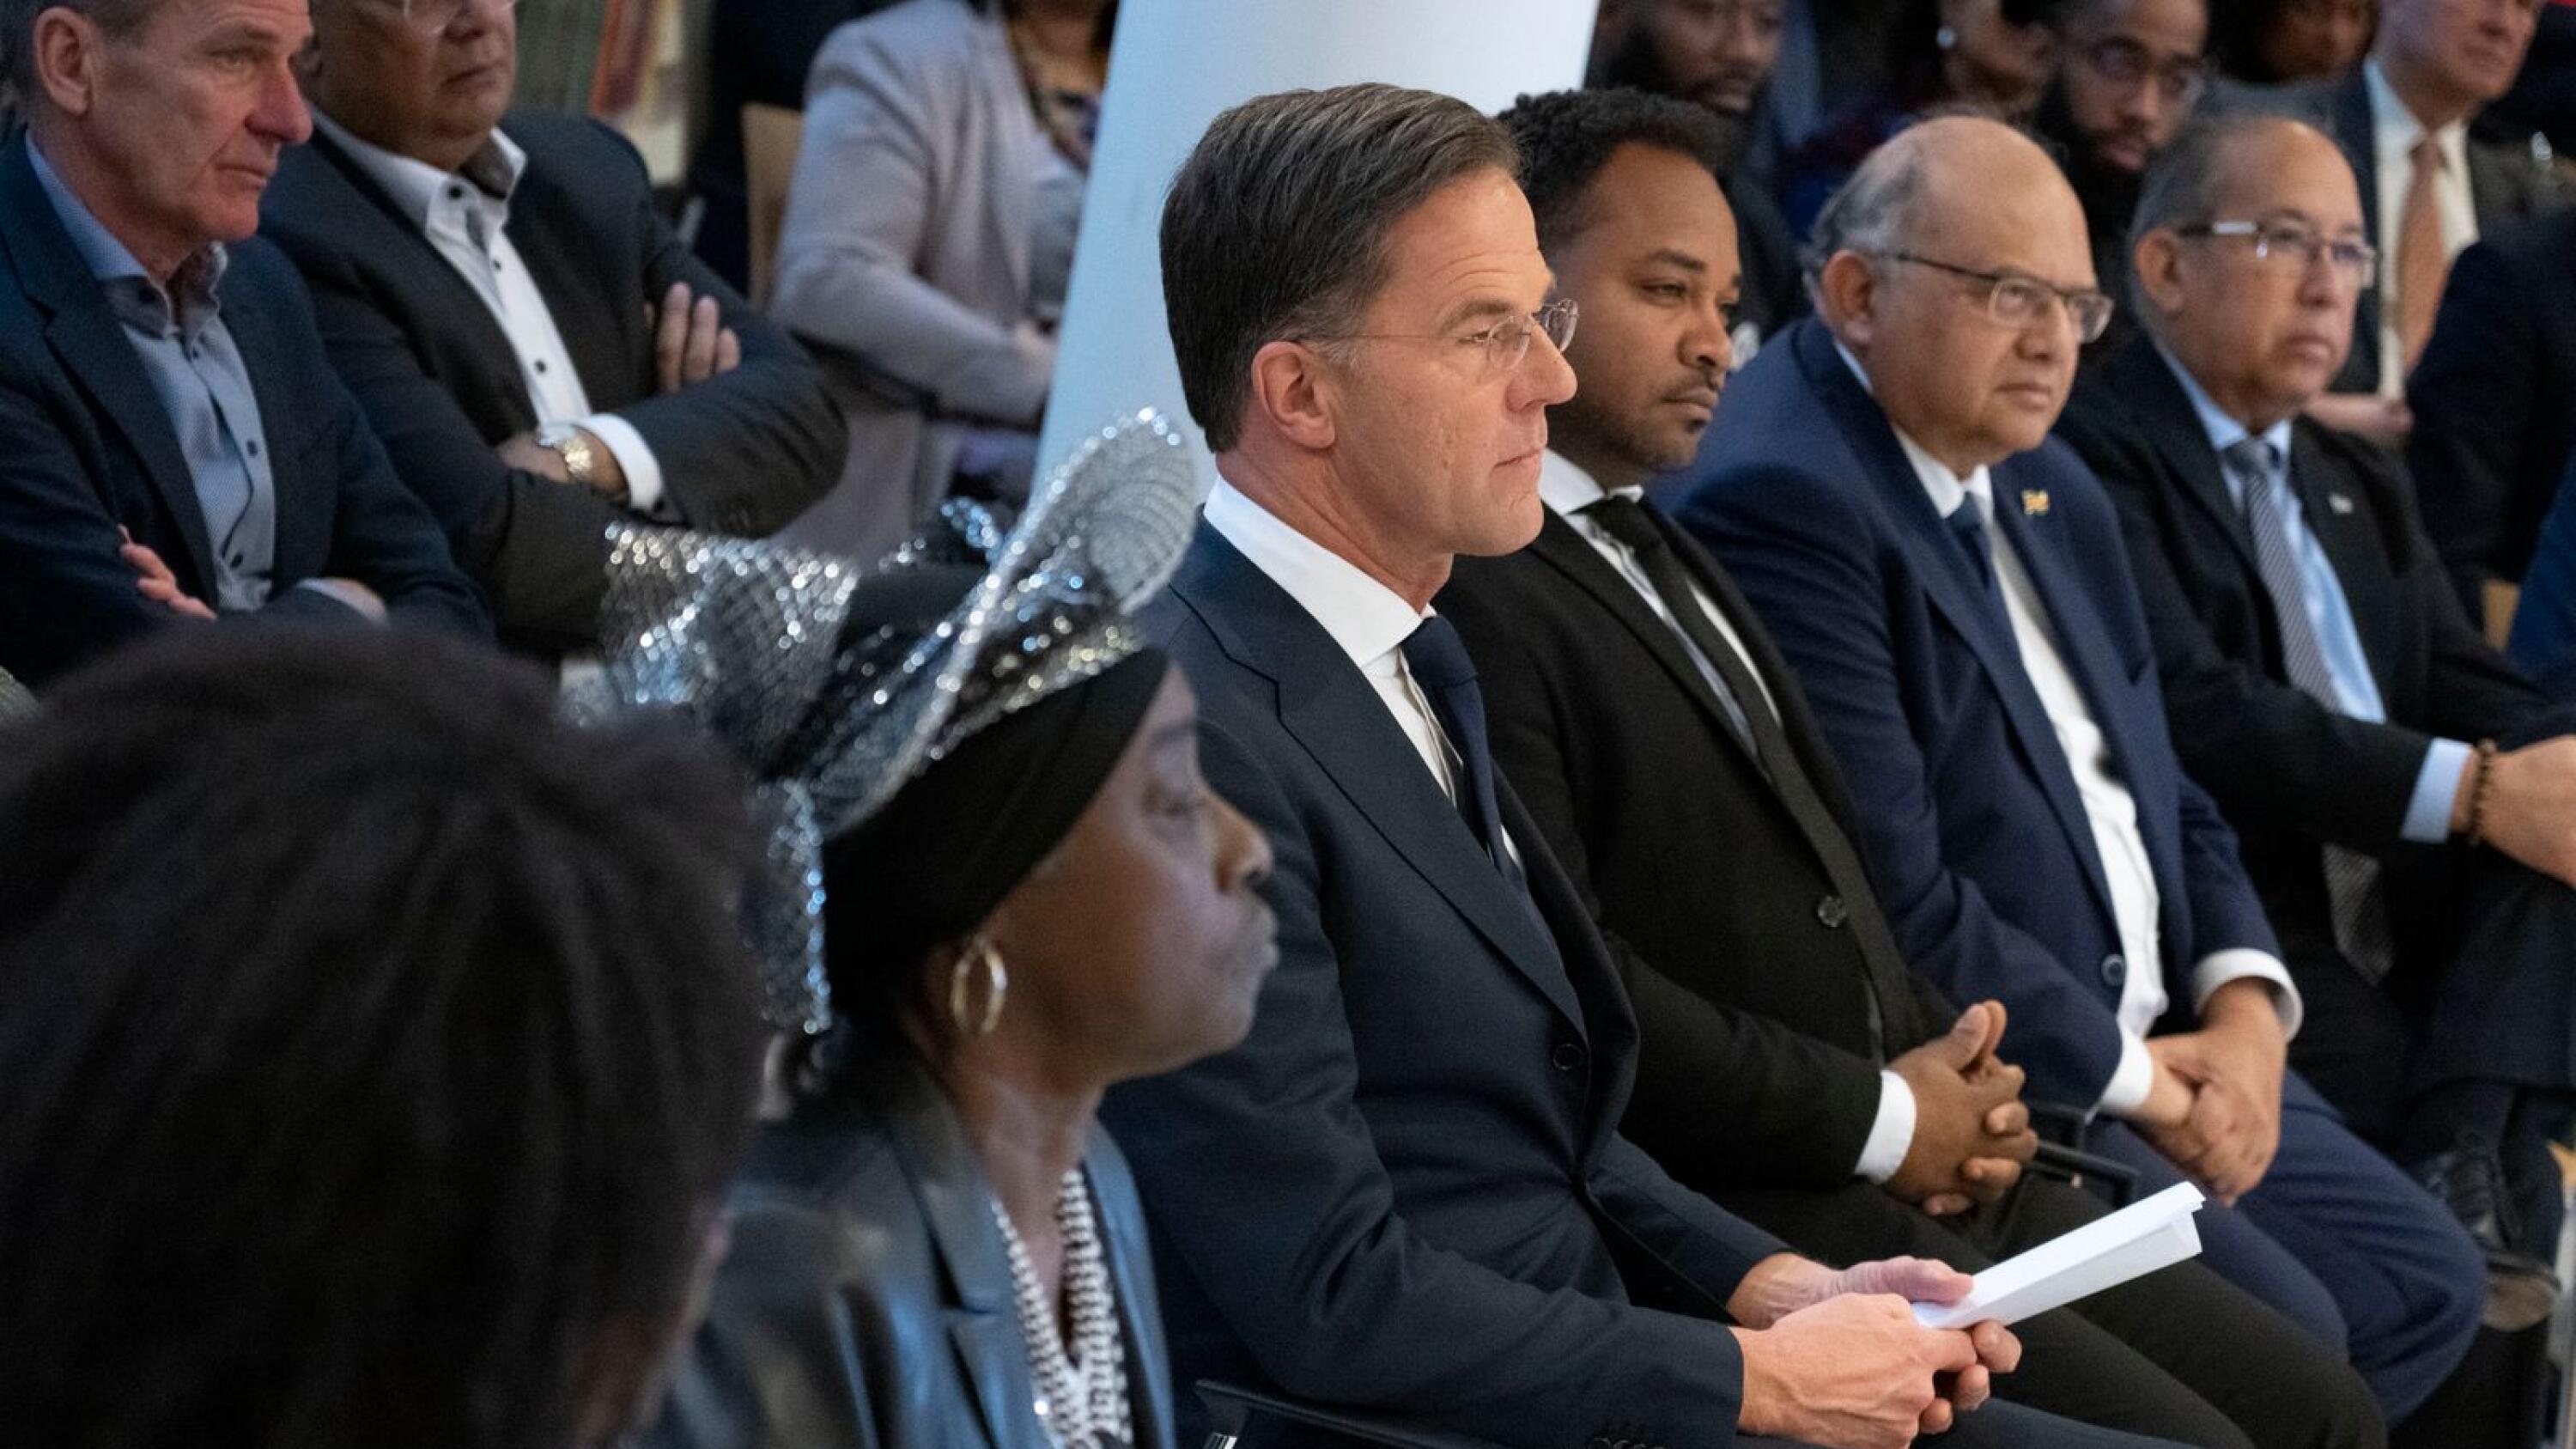 dutch leader apologizes for netherlands' role in slave trade